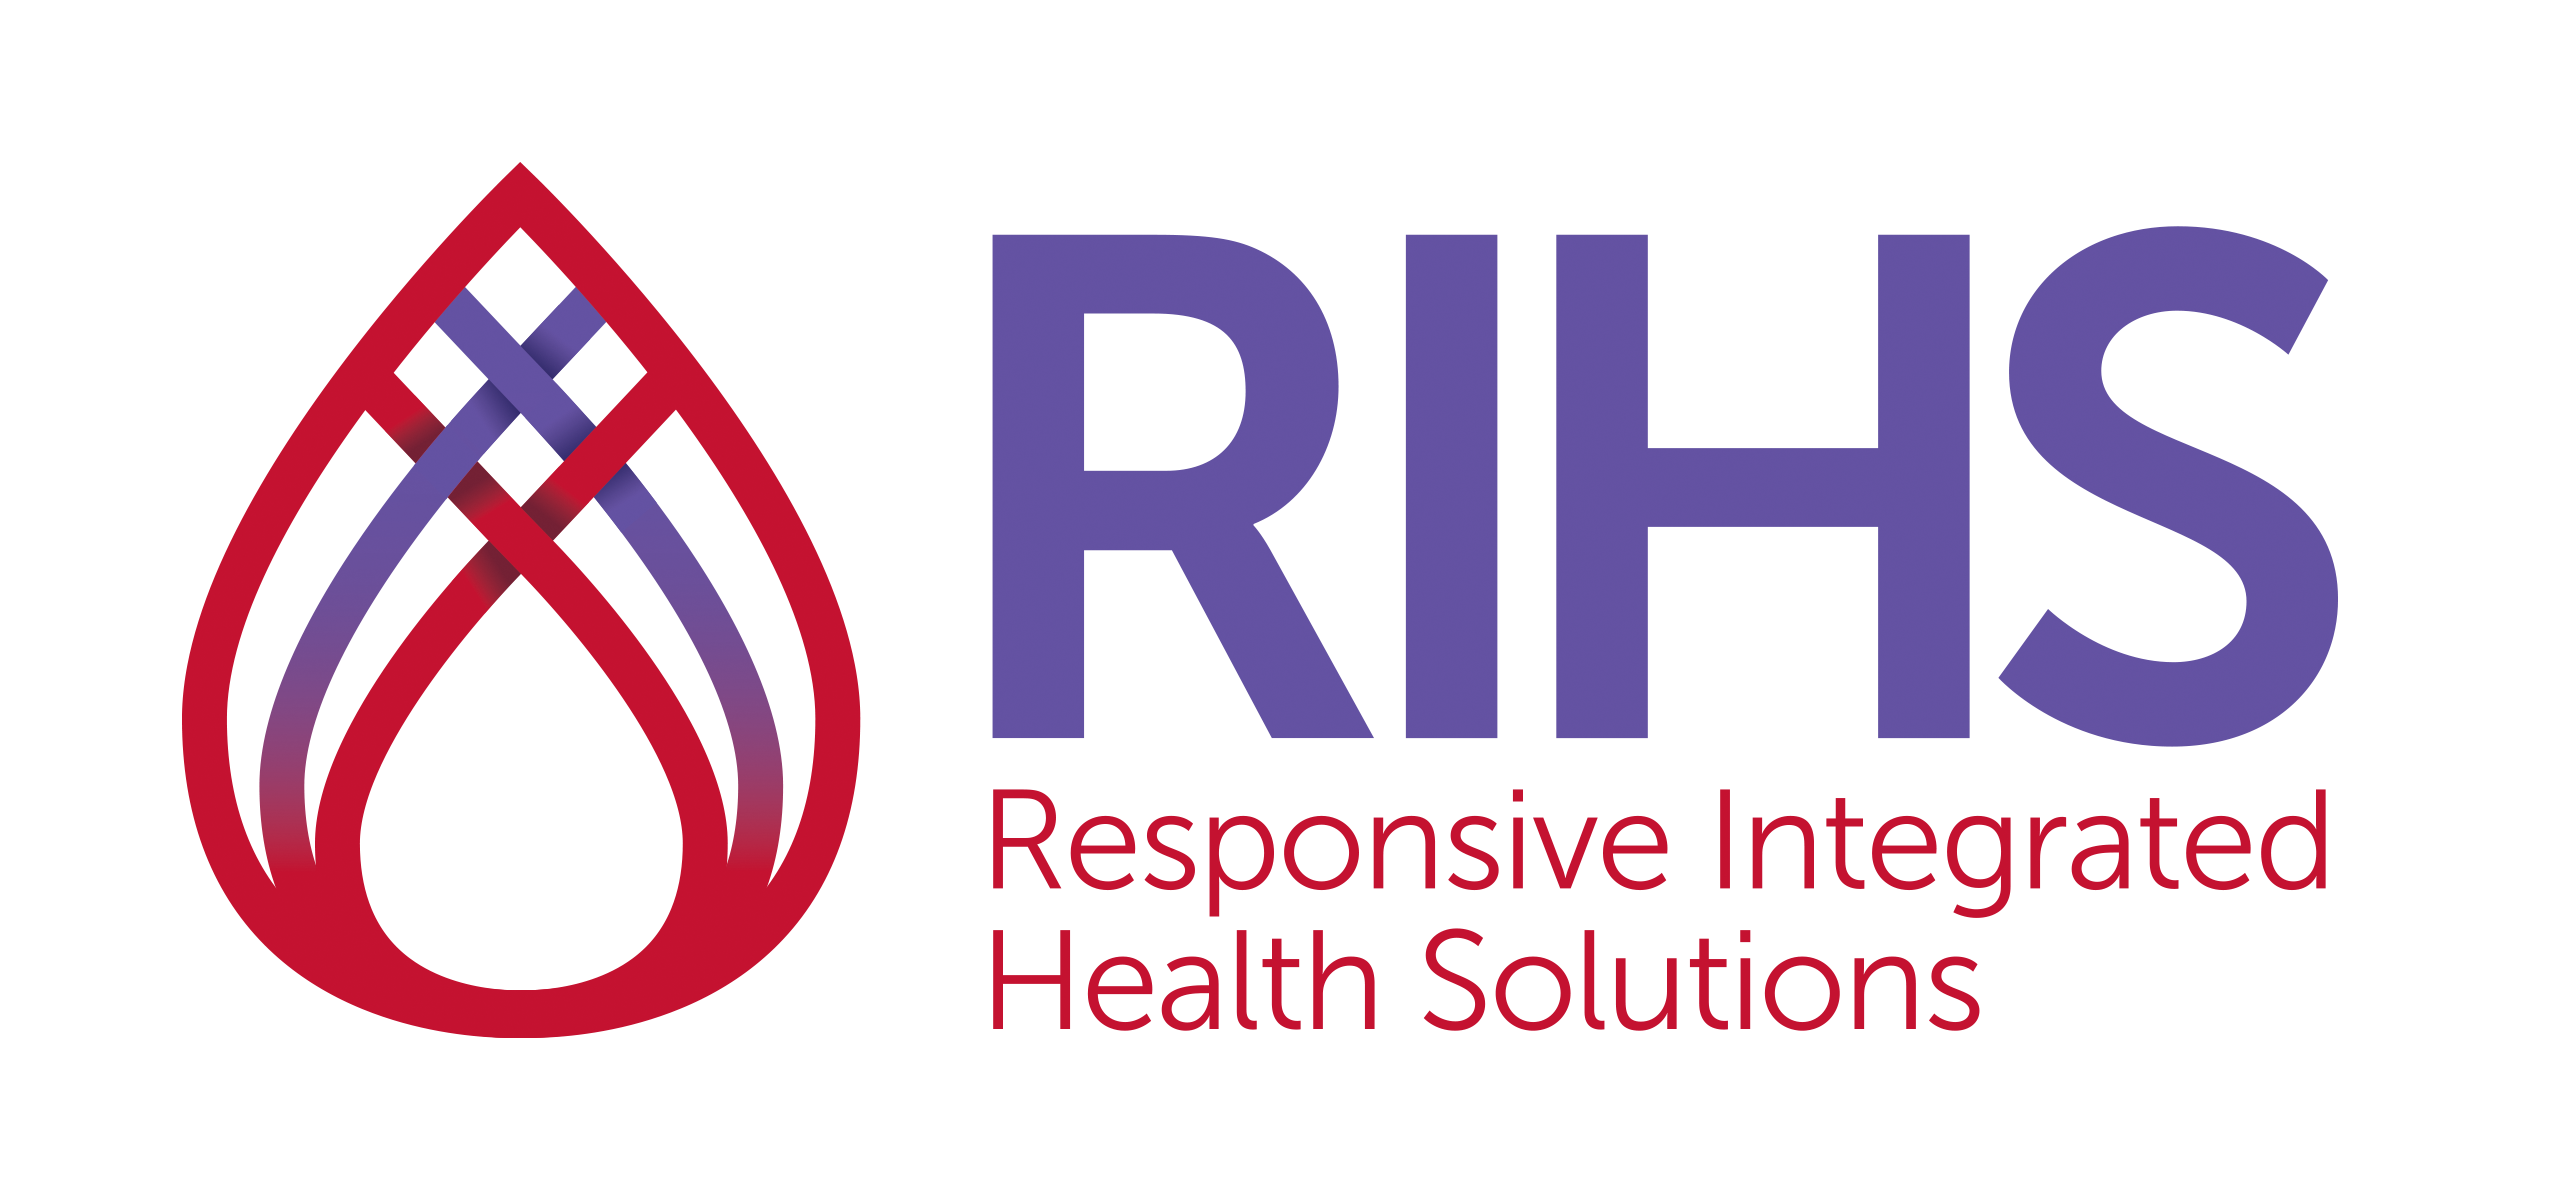 RIHS - Responsive Integrated Health Solutions Logo